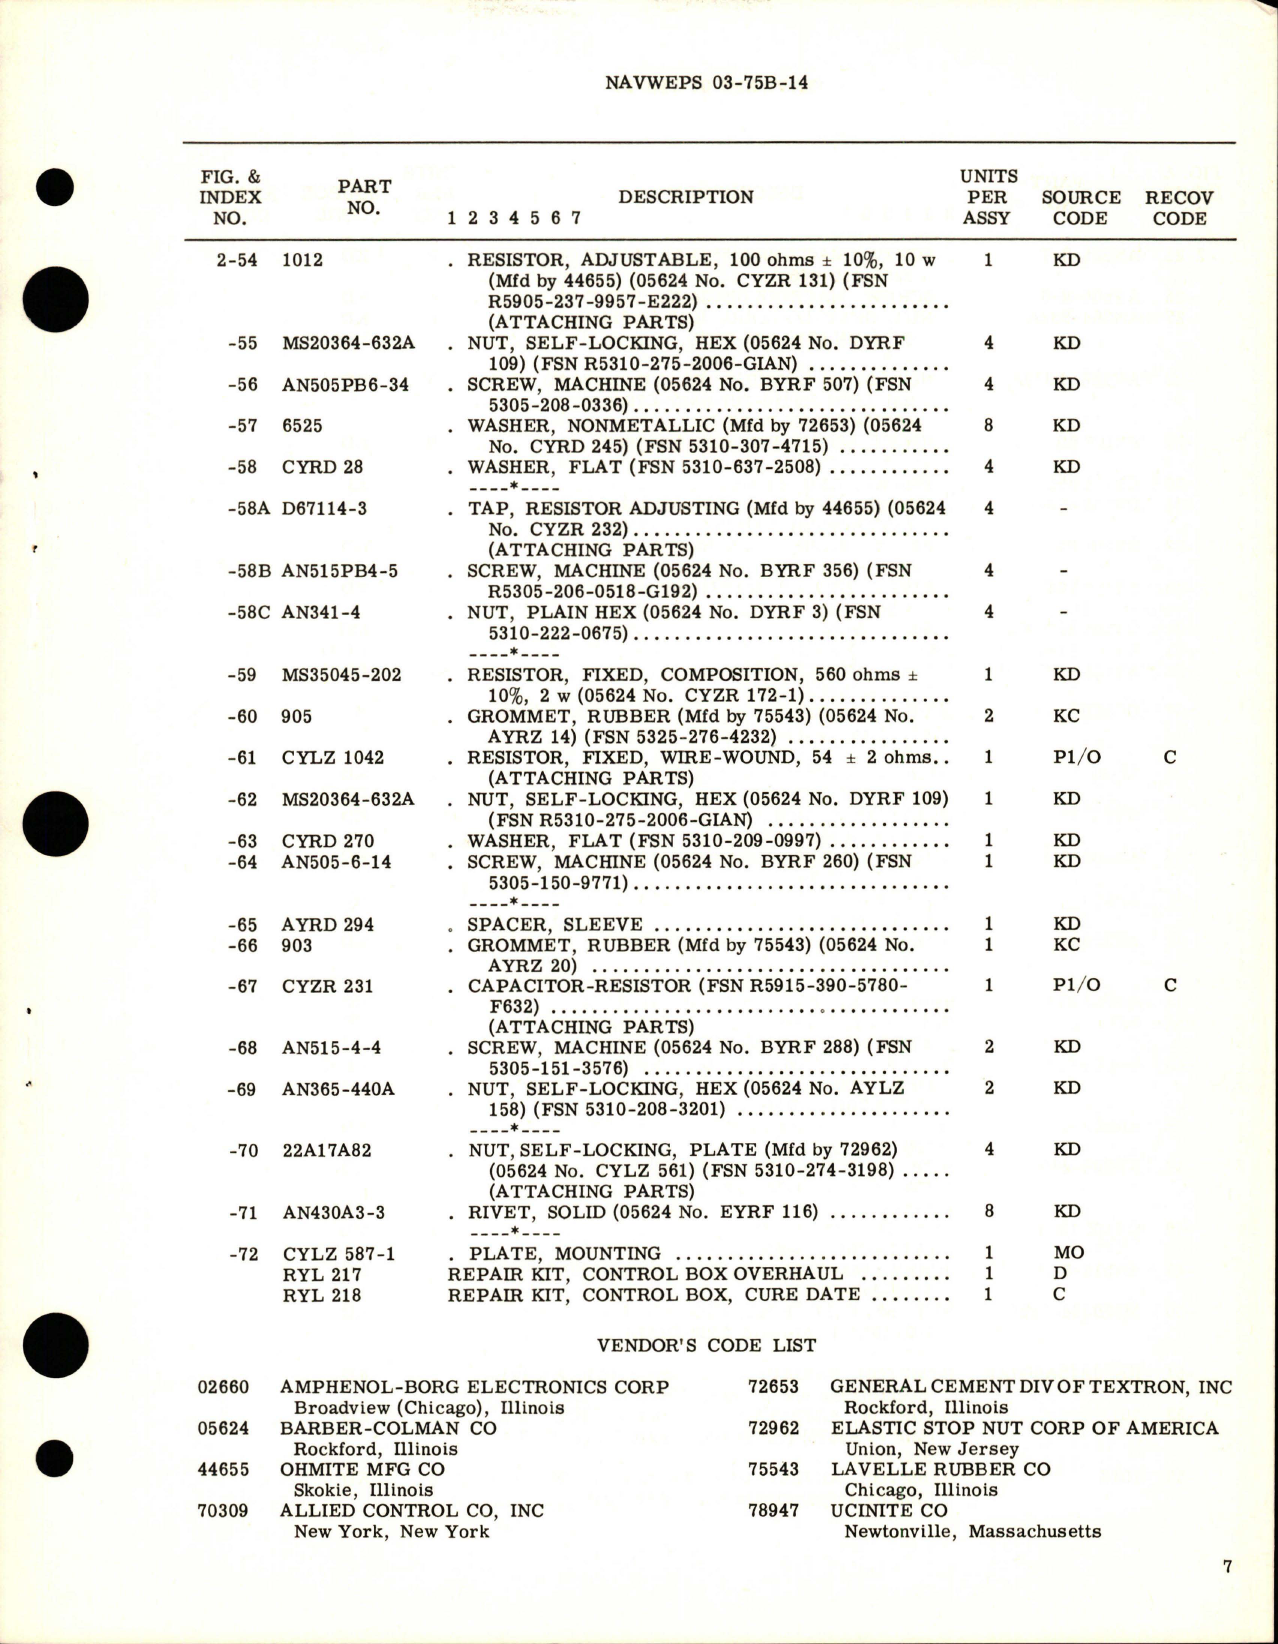 Sample page 5 from AirCorps Library document: Overhaul Instructions with Illustrated Parts Breakdown for Control Box Assembly - Part CYLZ 4271-2